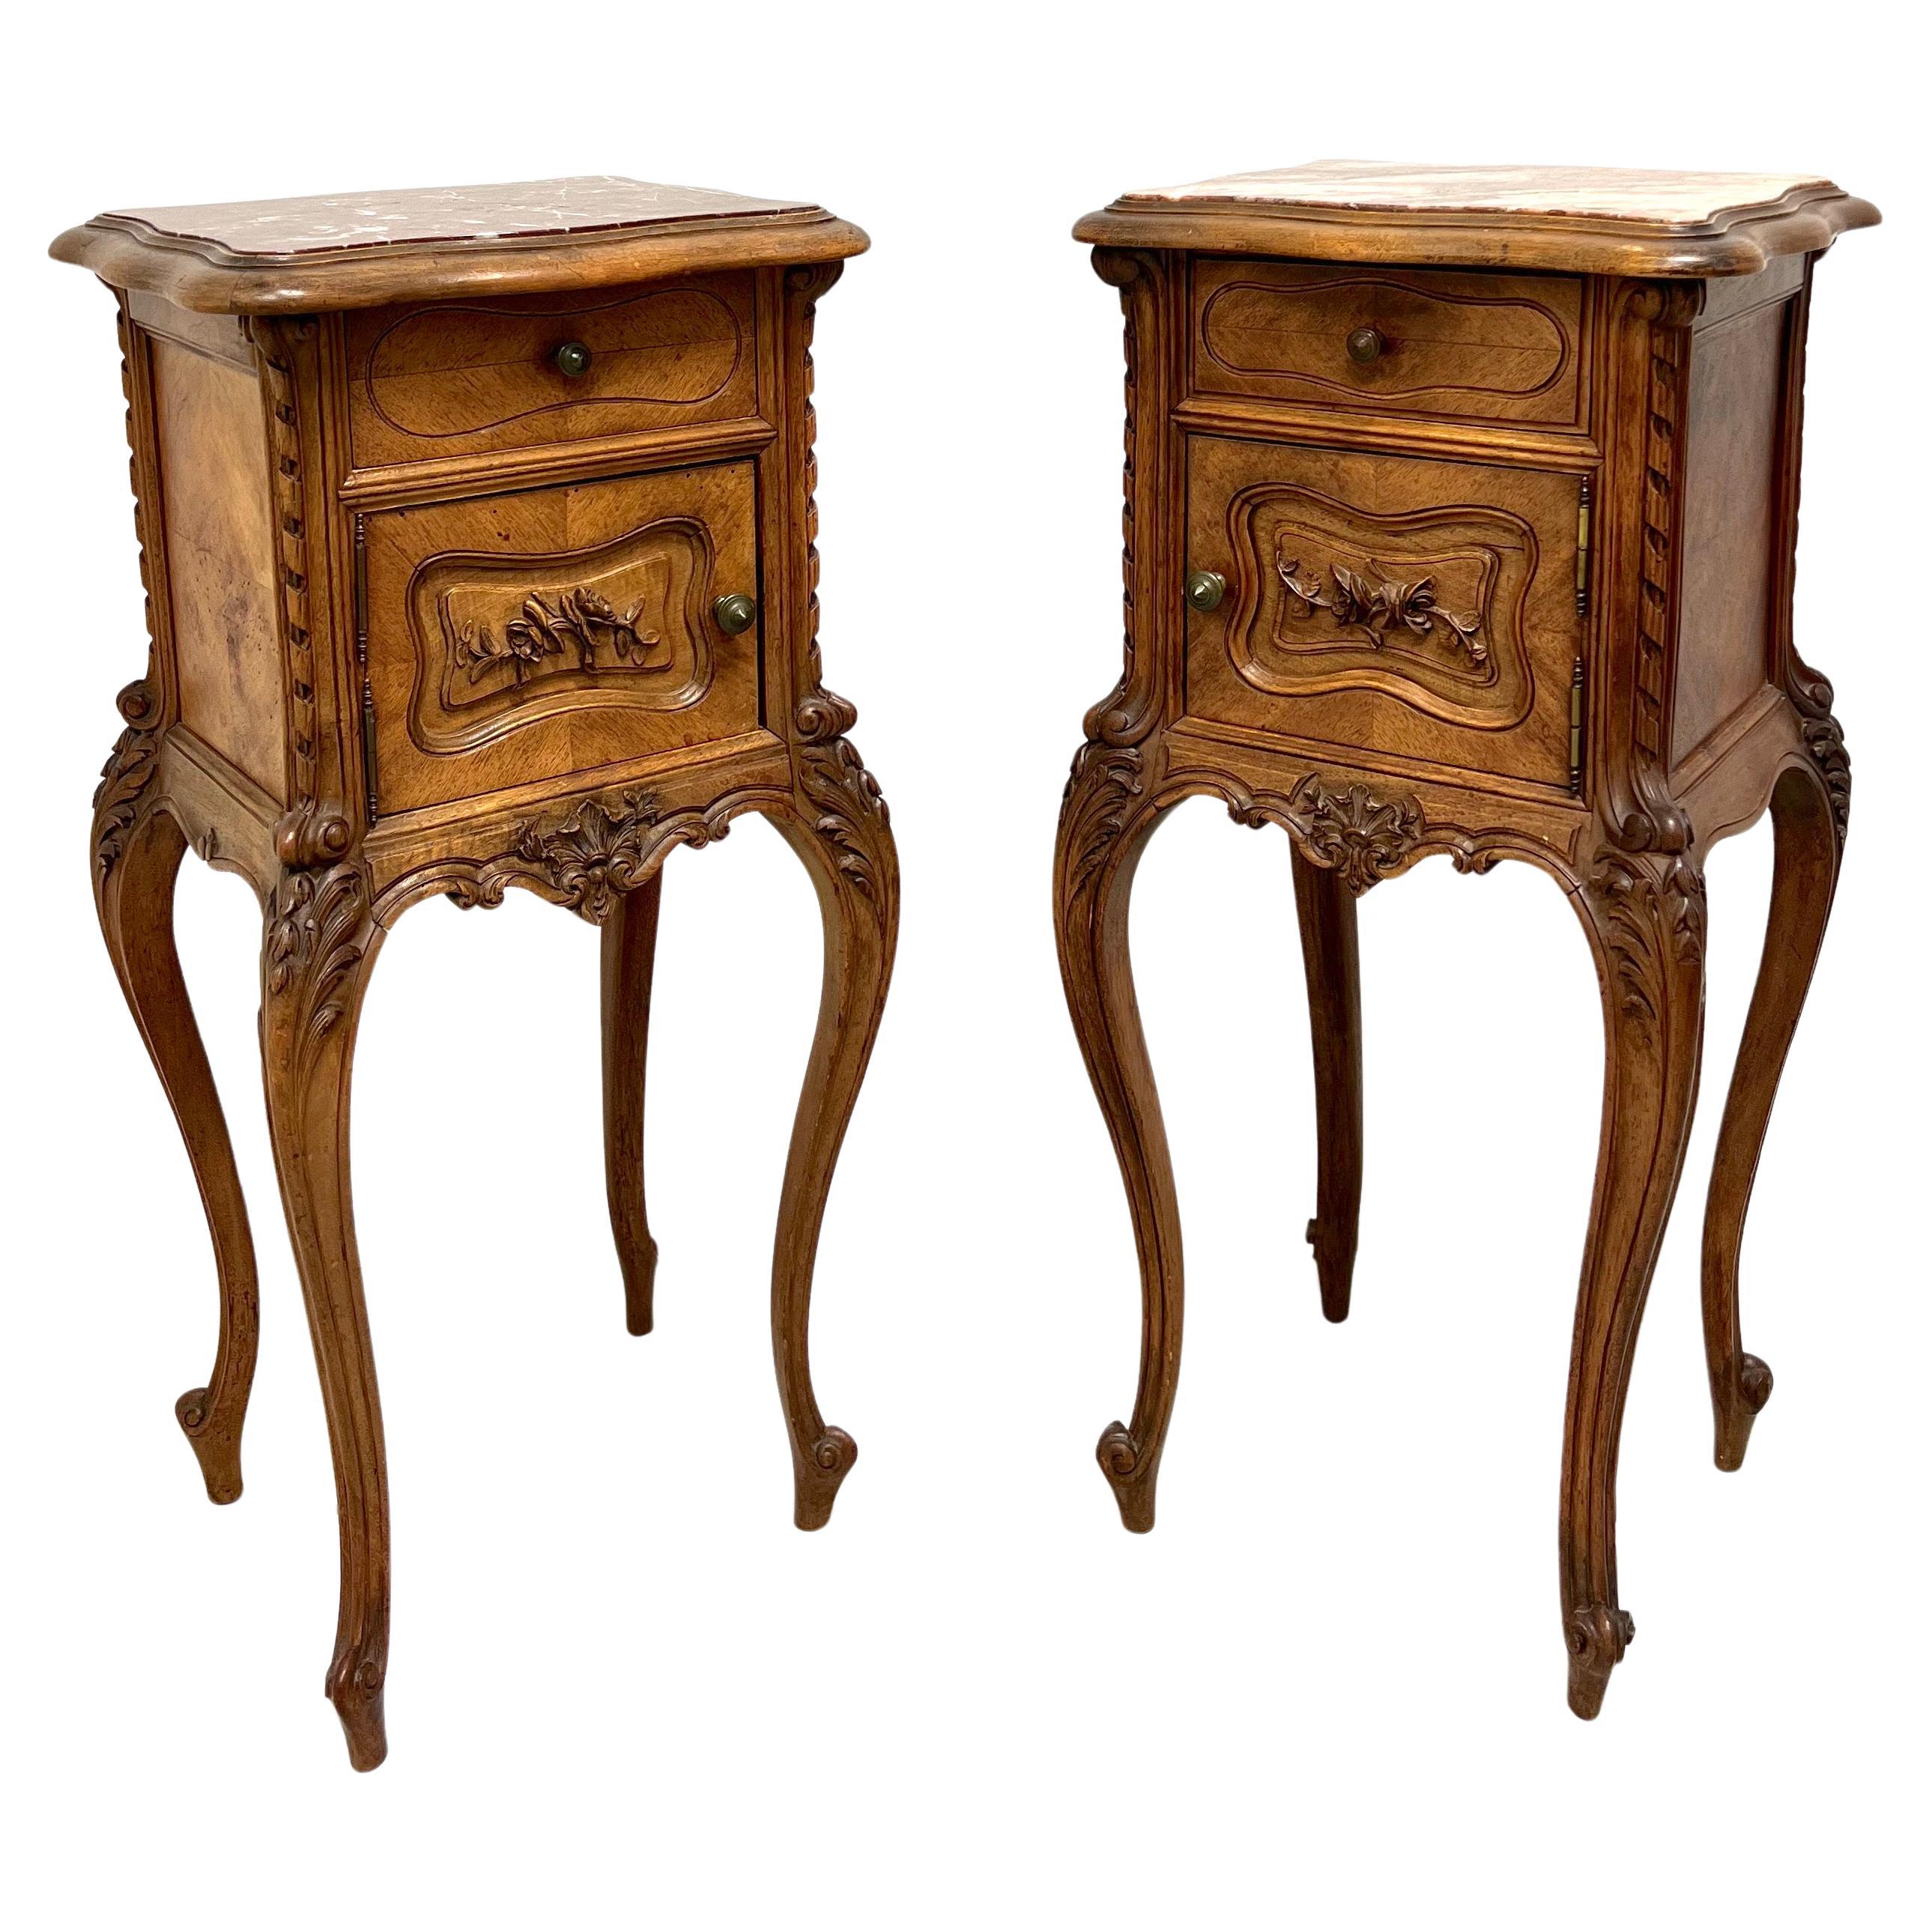 Antique Carved Chestnut French Country Louis XV Commodes / Nightstands - Pair